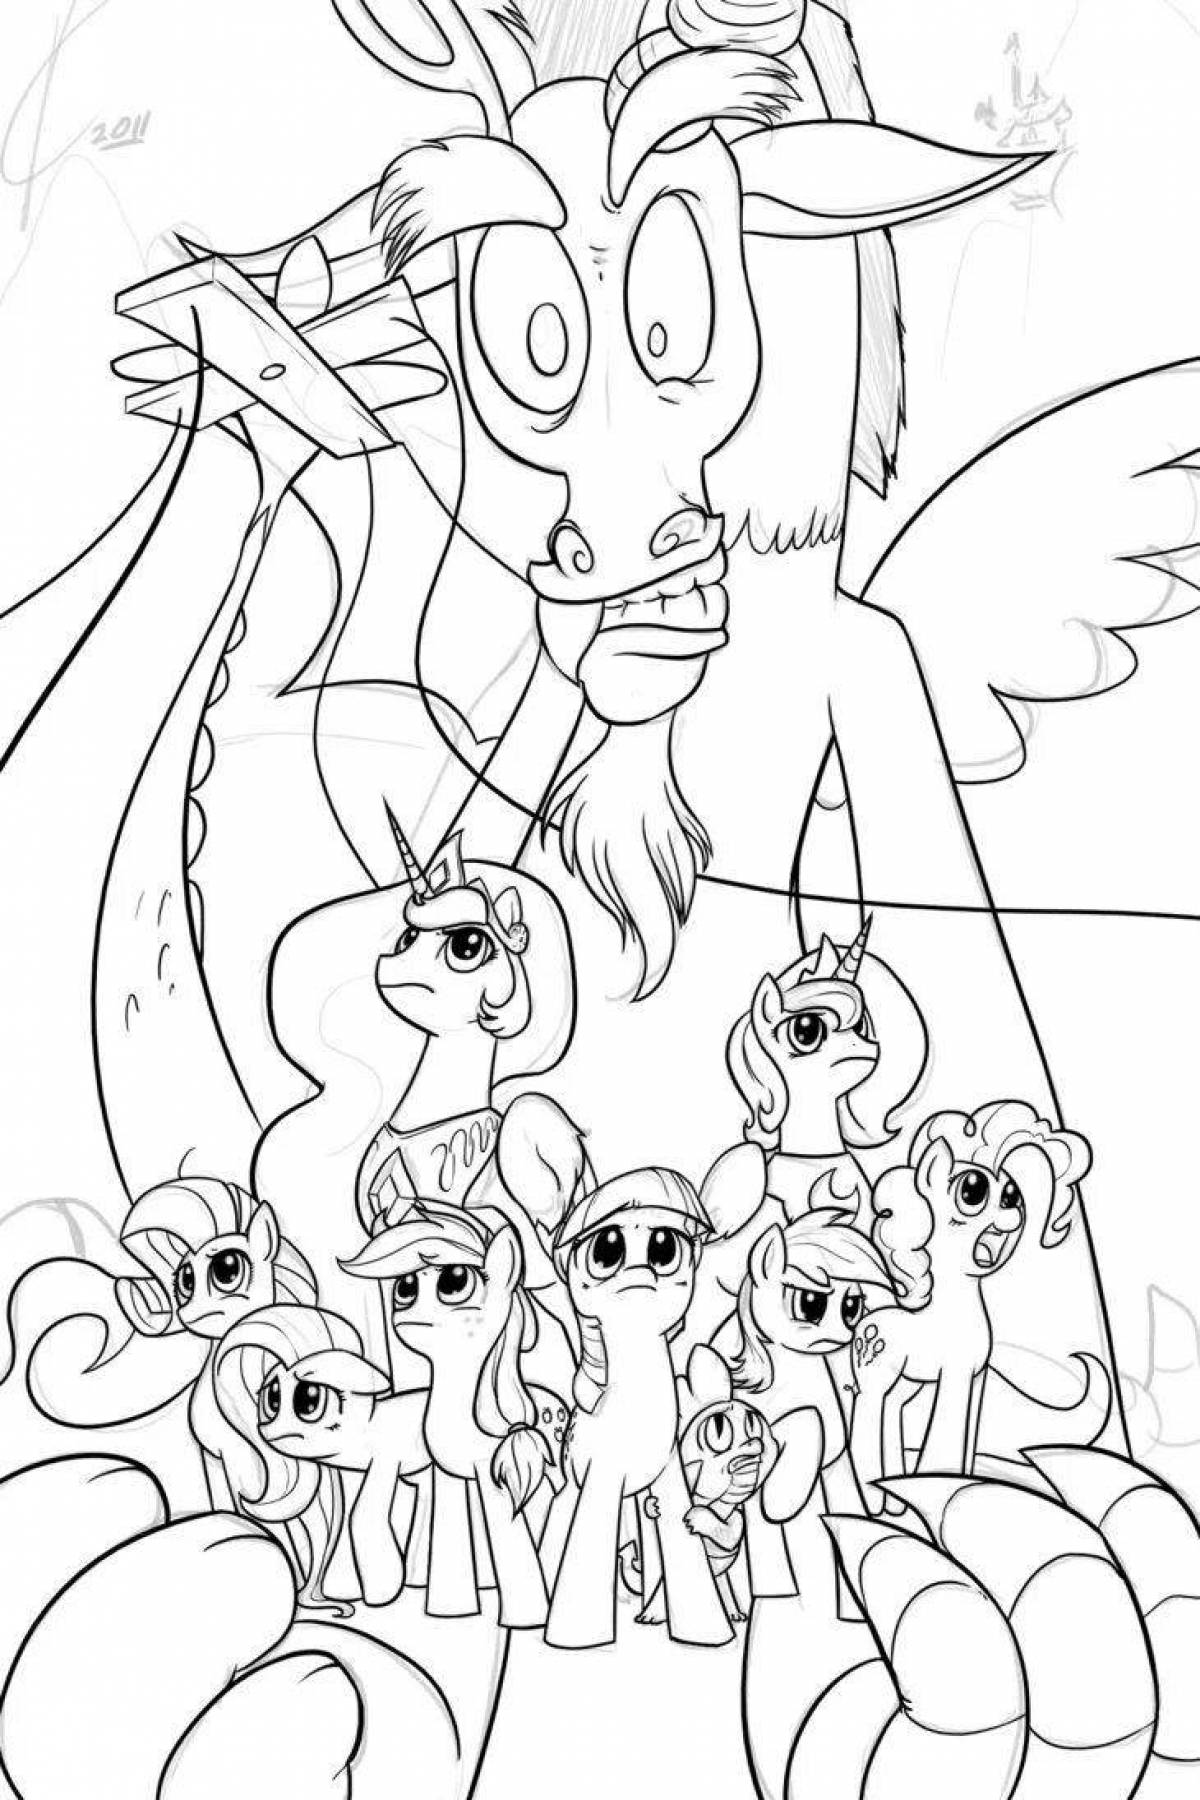 Creative discord coloring page